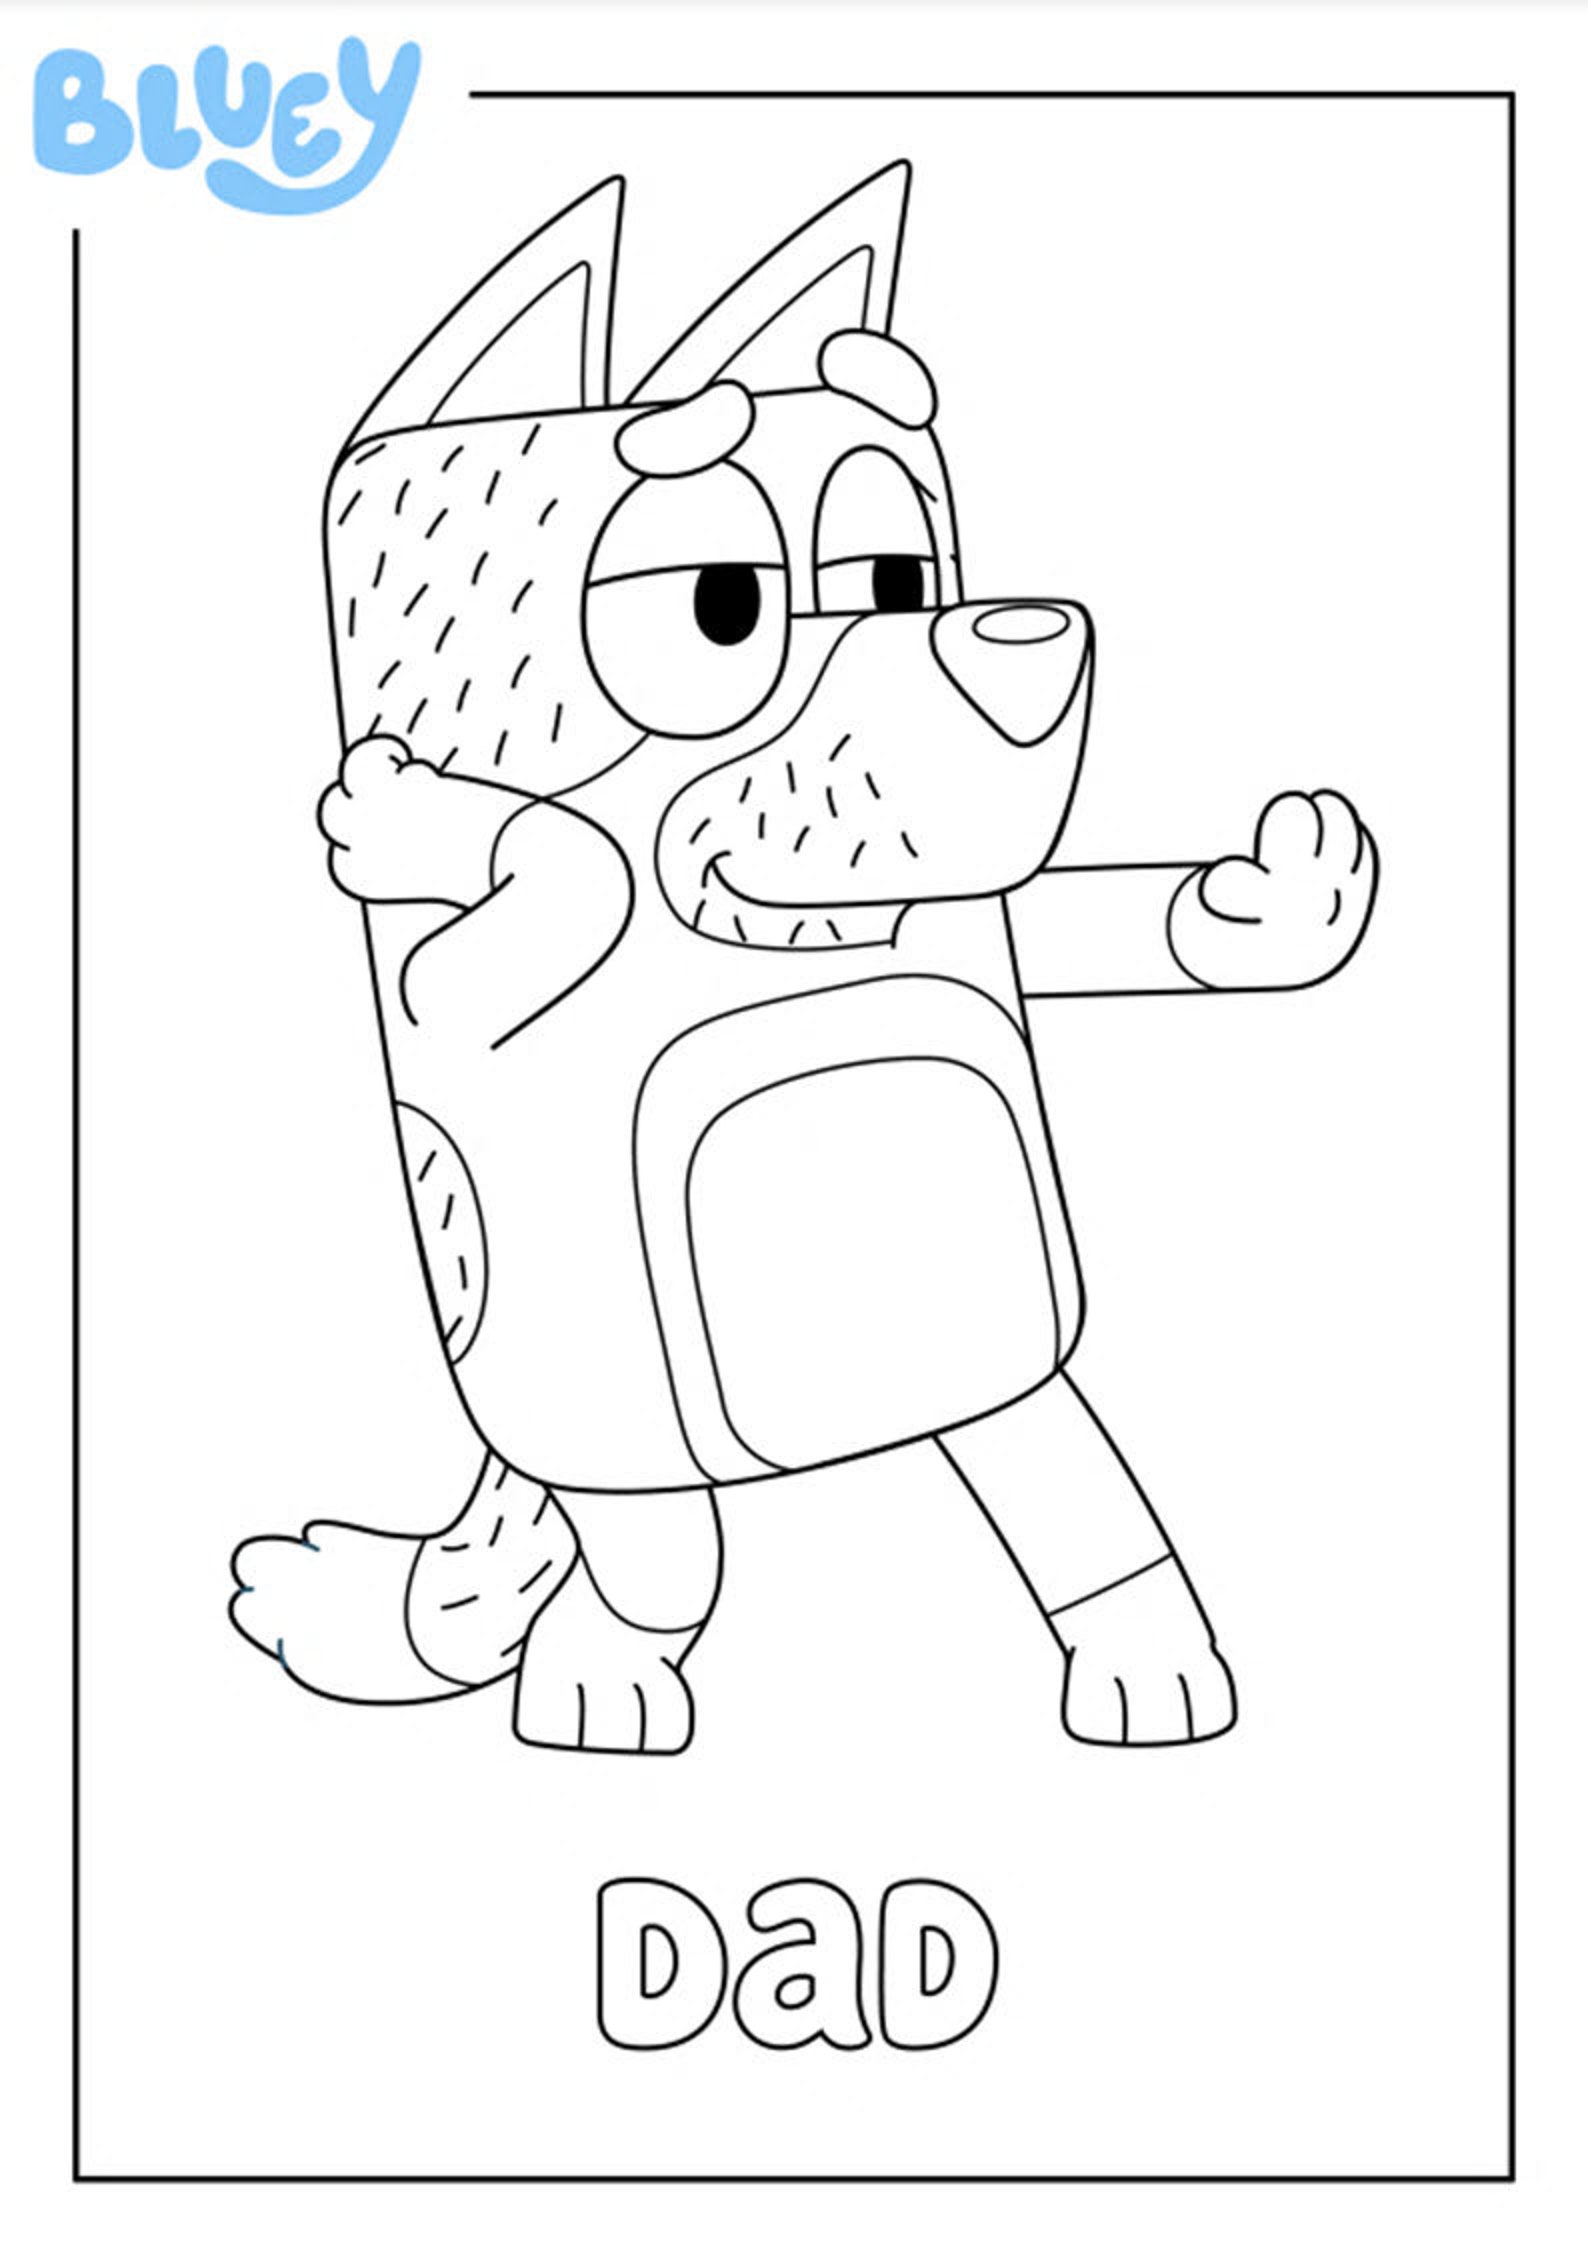 Bluey Colouring Pages Printable Instant Download Etsy